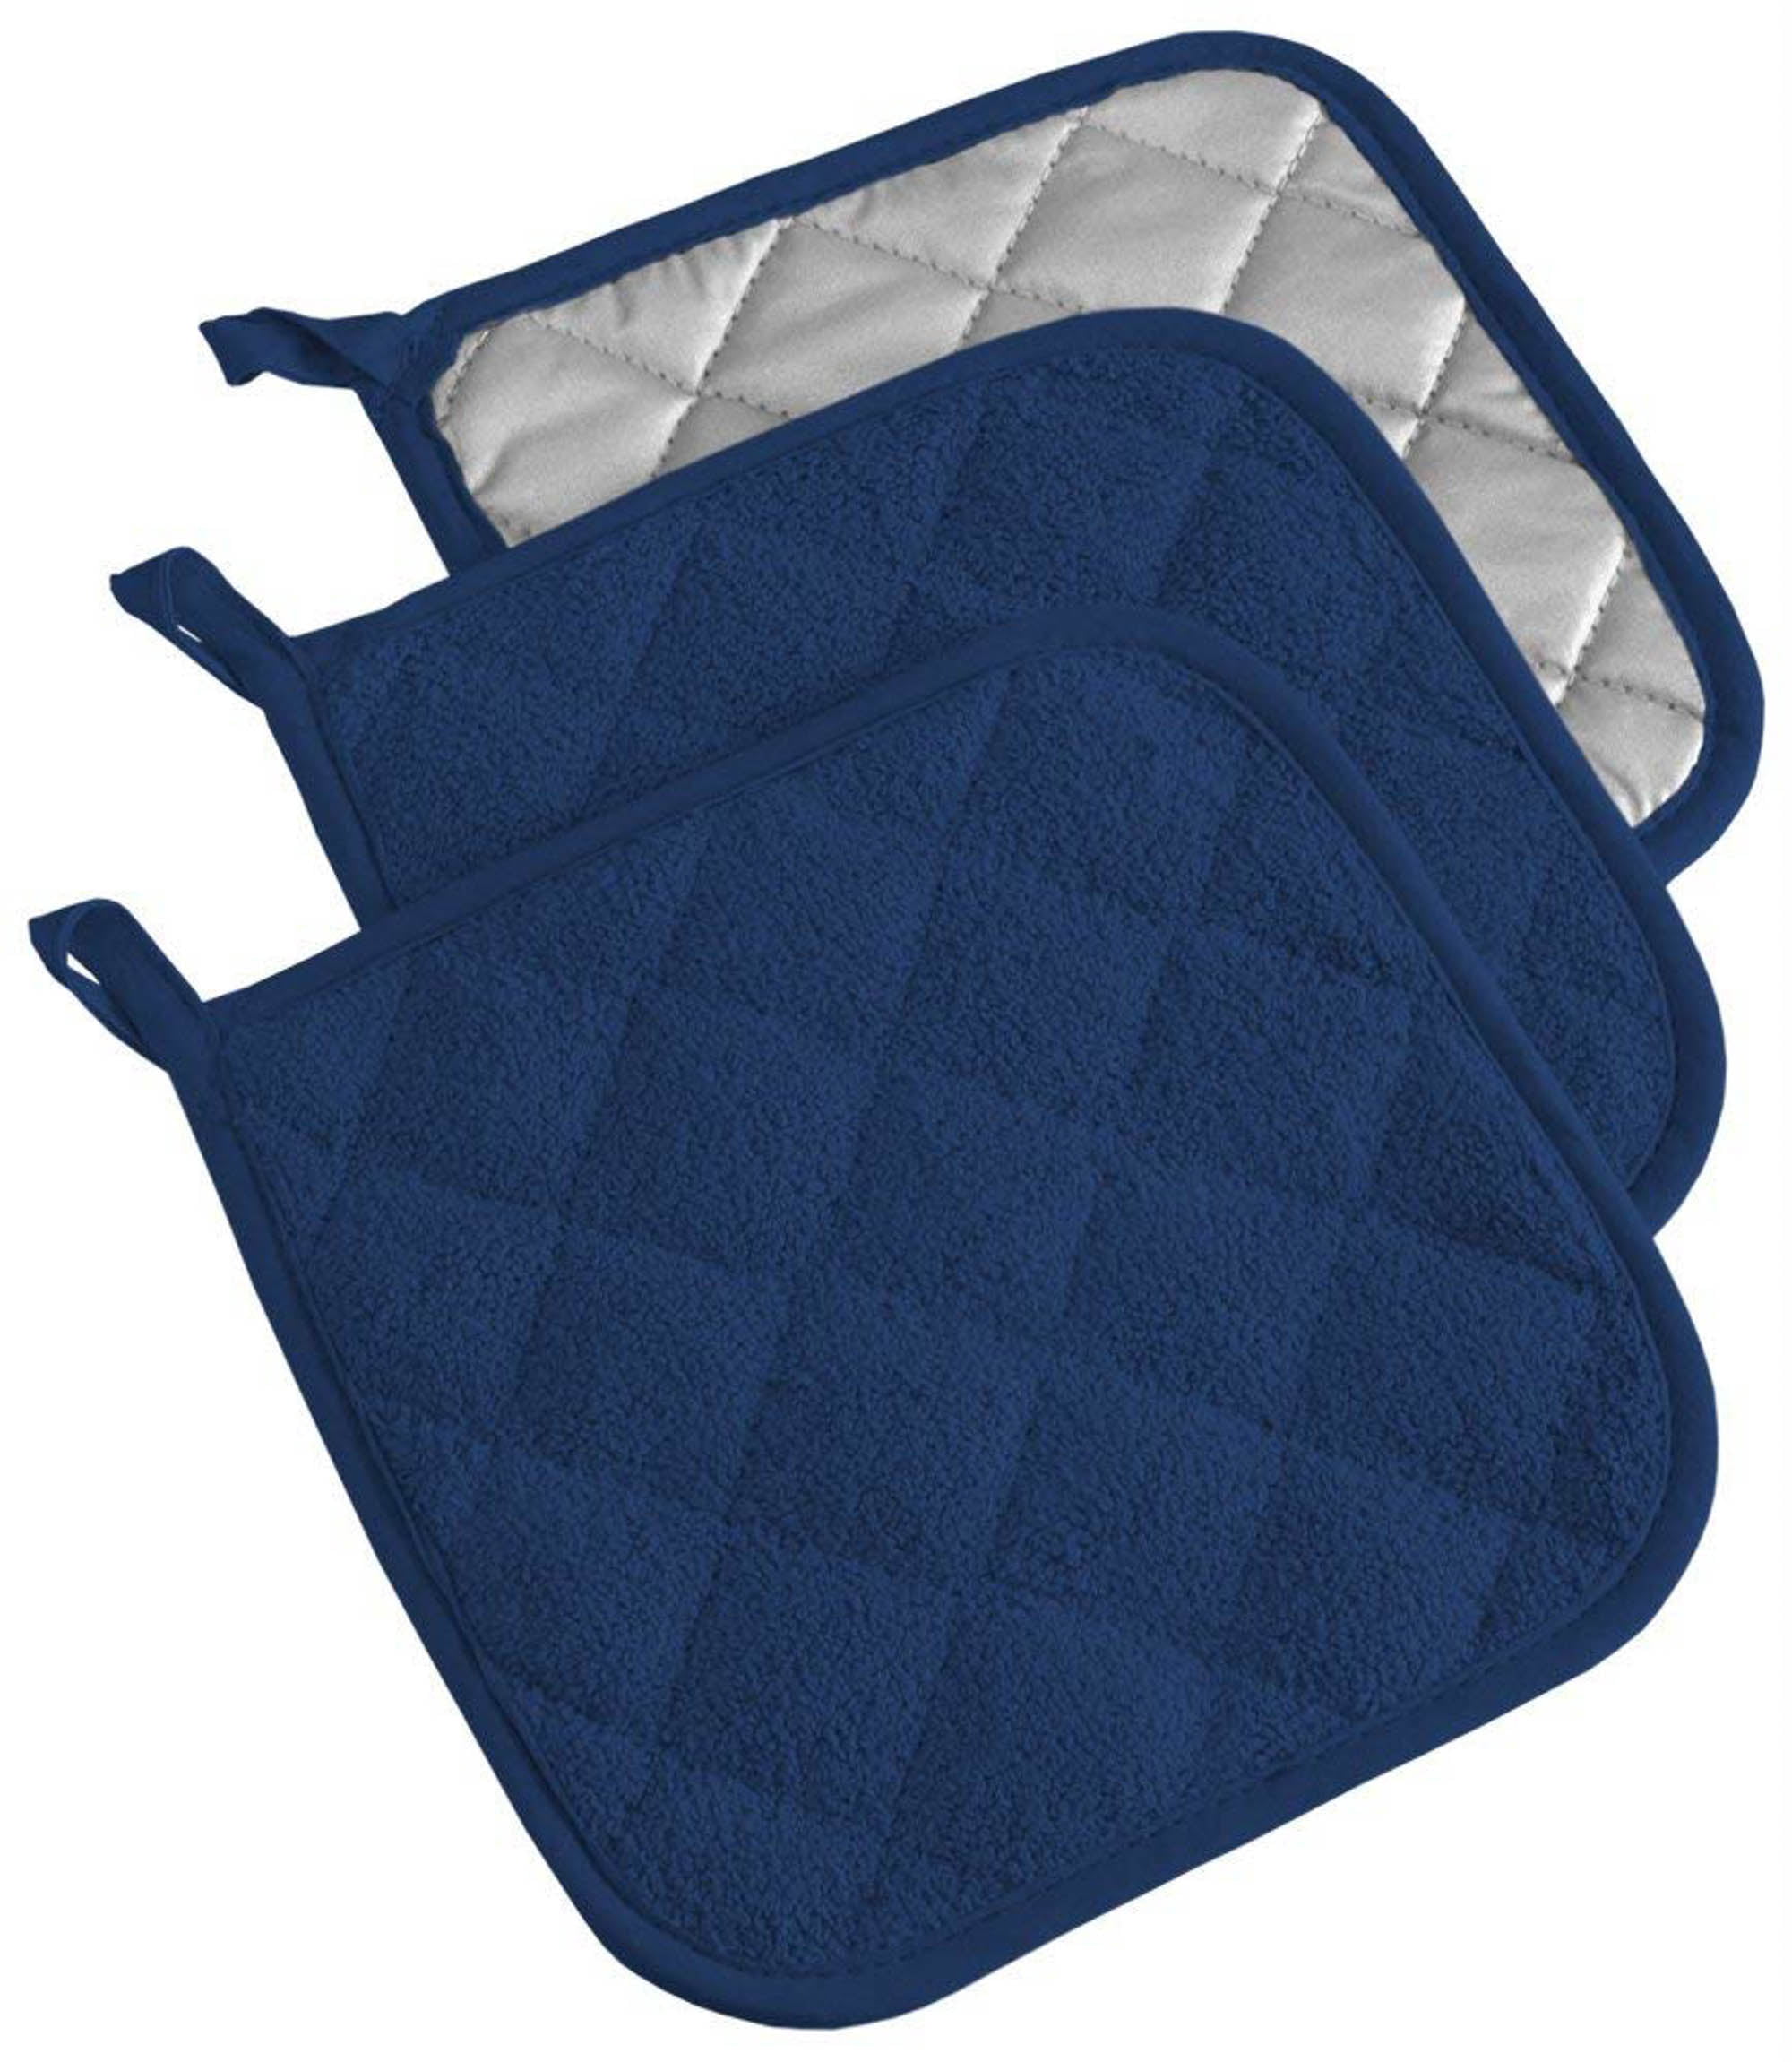 Quilted Terry Oven Set Machine Washable 3 Piece Potholder Mustard DII 100% Cotton Heat Resistant with Hanging Loop 7 x 7 